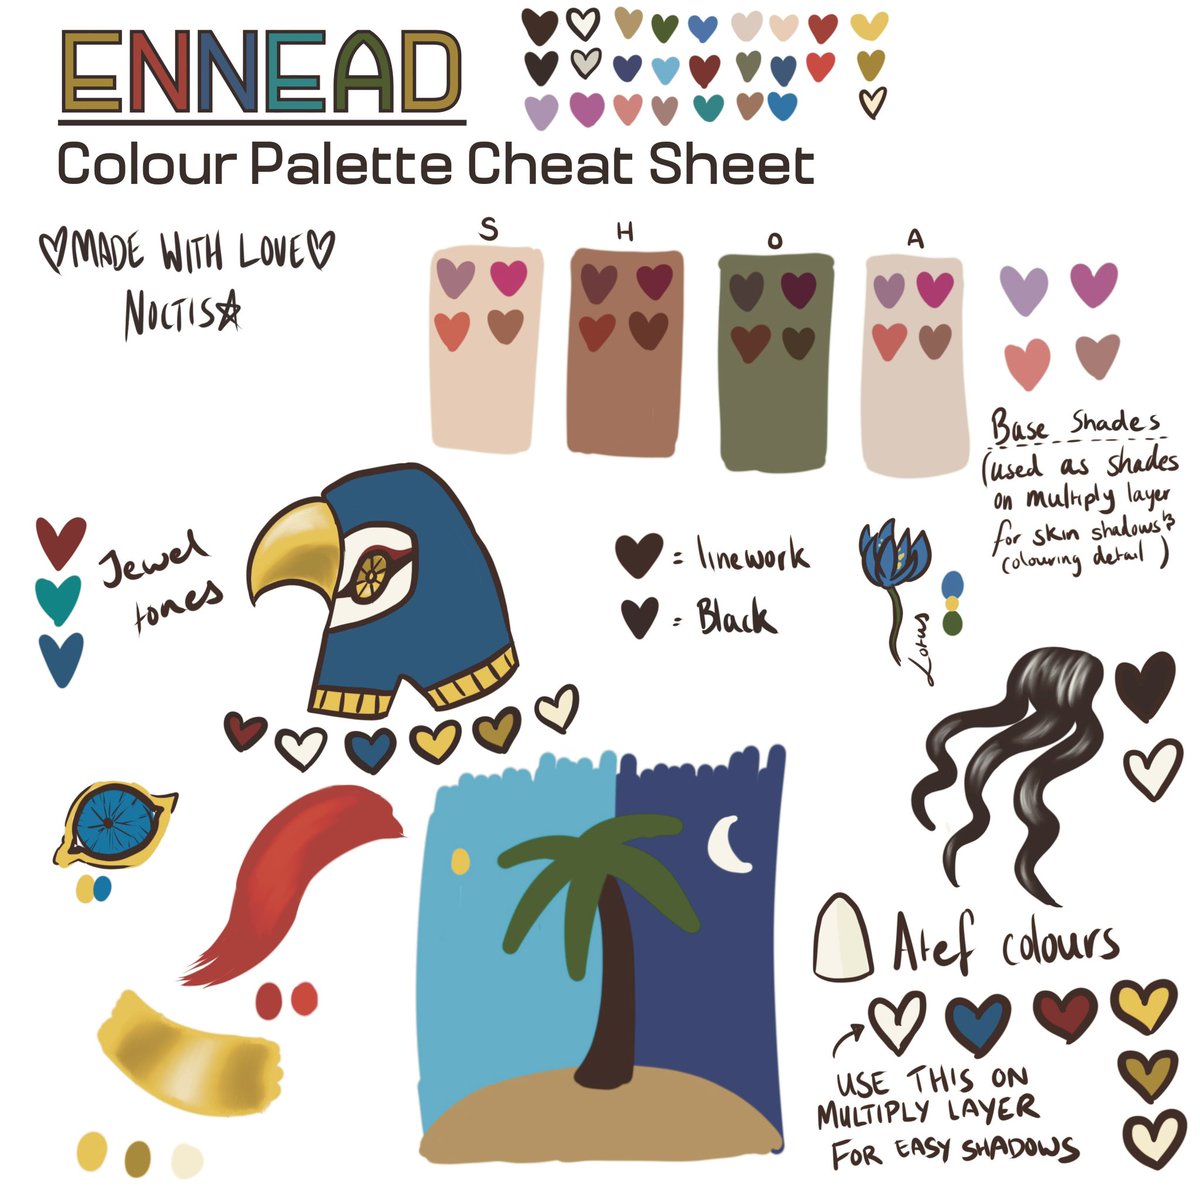 🎨ENNEAD Colour Palette Cheat Sheet🎨
Just a random little thing for y’all! 🥰💖🙏 My little cheat sheet for colouring my Ennead art 🫣🤫 

I would love to see other artists Ennead Colour Palettes! 🎨😍🥰🙏💖
#ENNEAD #ColourPalette #FanArt #EnneadColourPalette